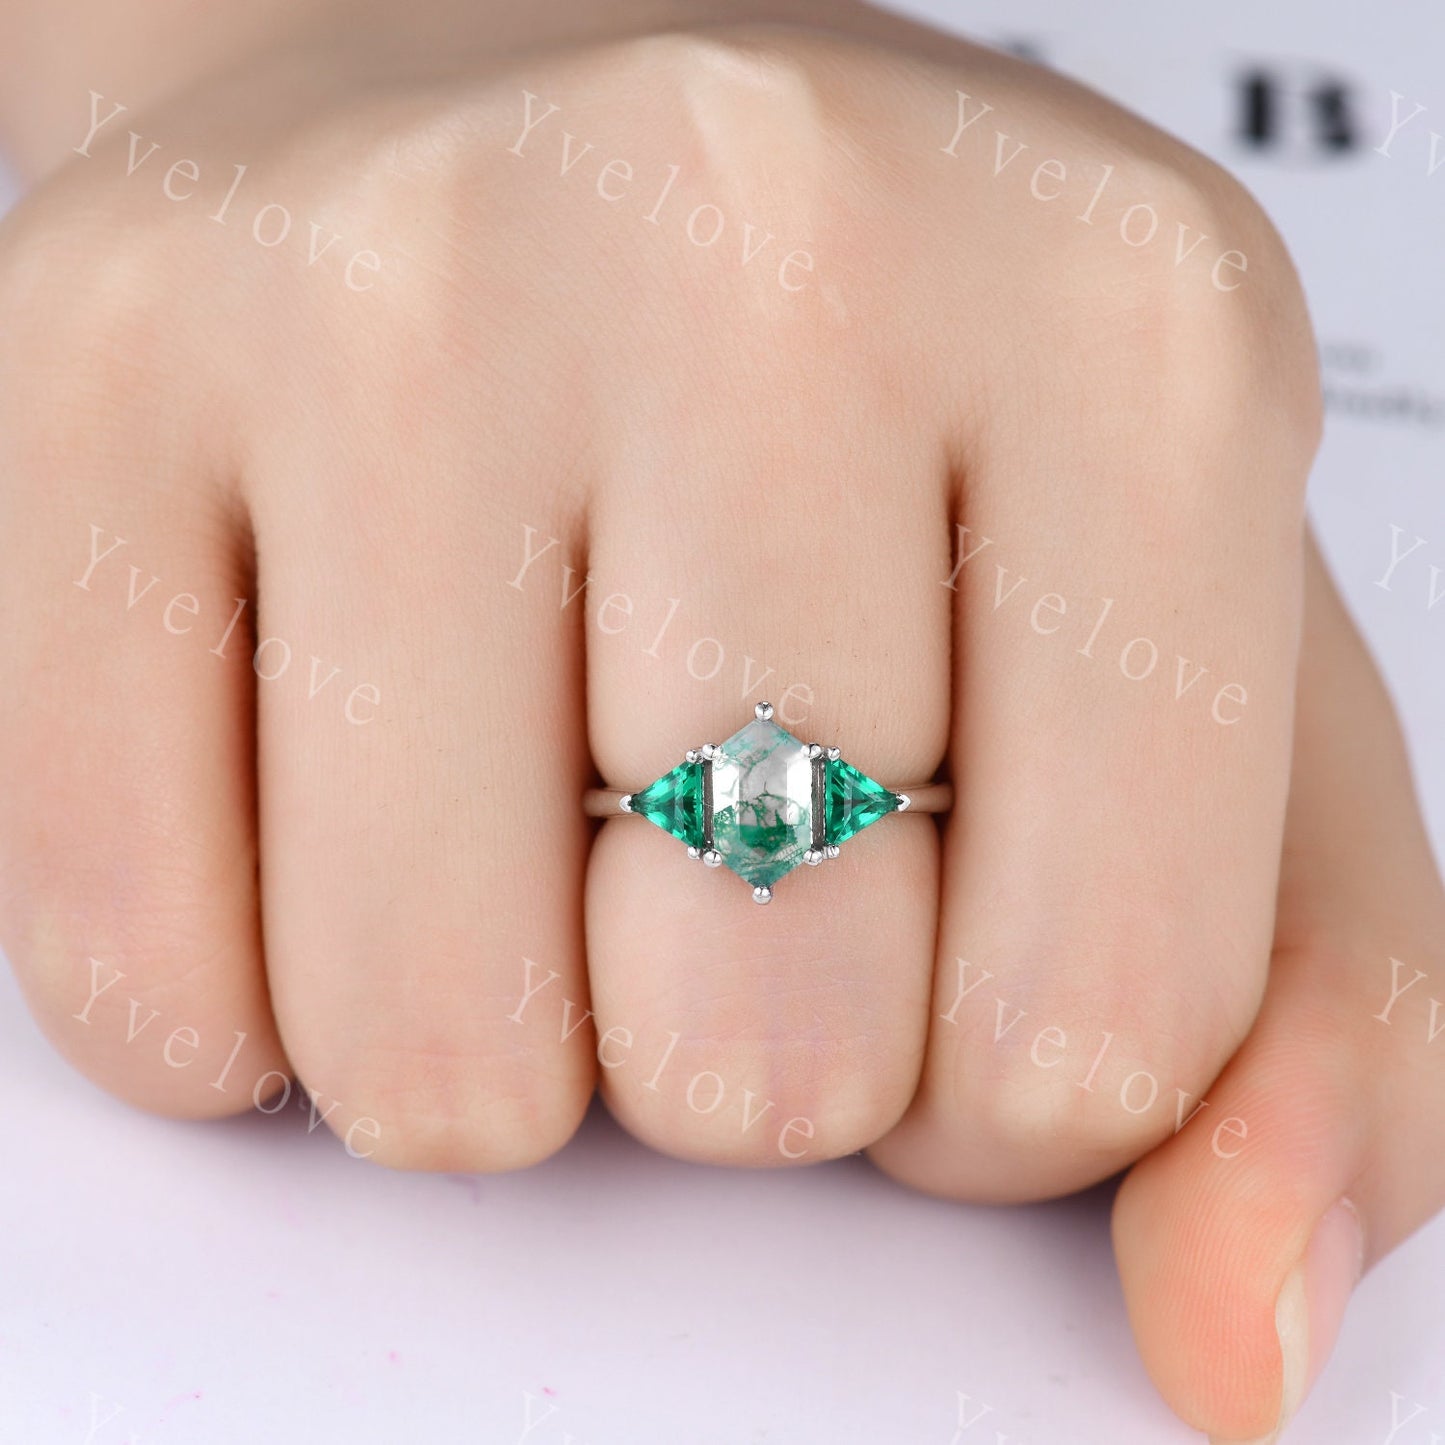 Hexagon shaped Moss Agate Engagement Ring,Silver Ring Set,Unique Emerald Matching Stack Ring,Green Gem Promise Ring,Anniversary Ring Gift